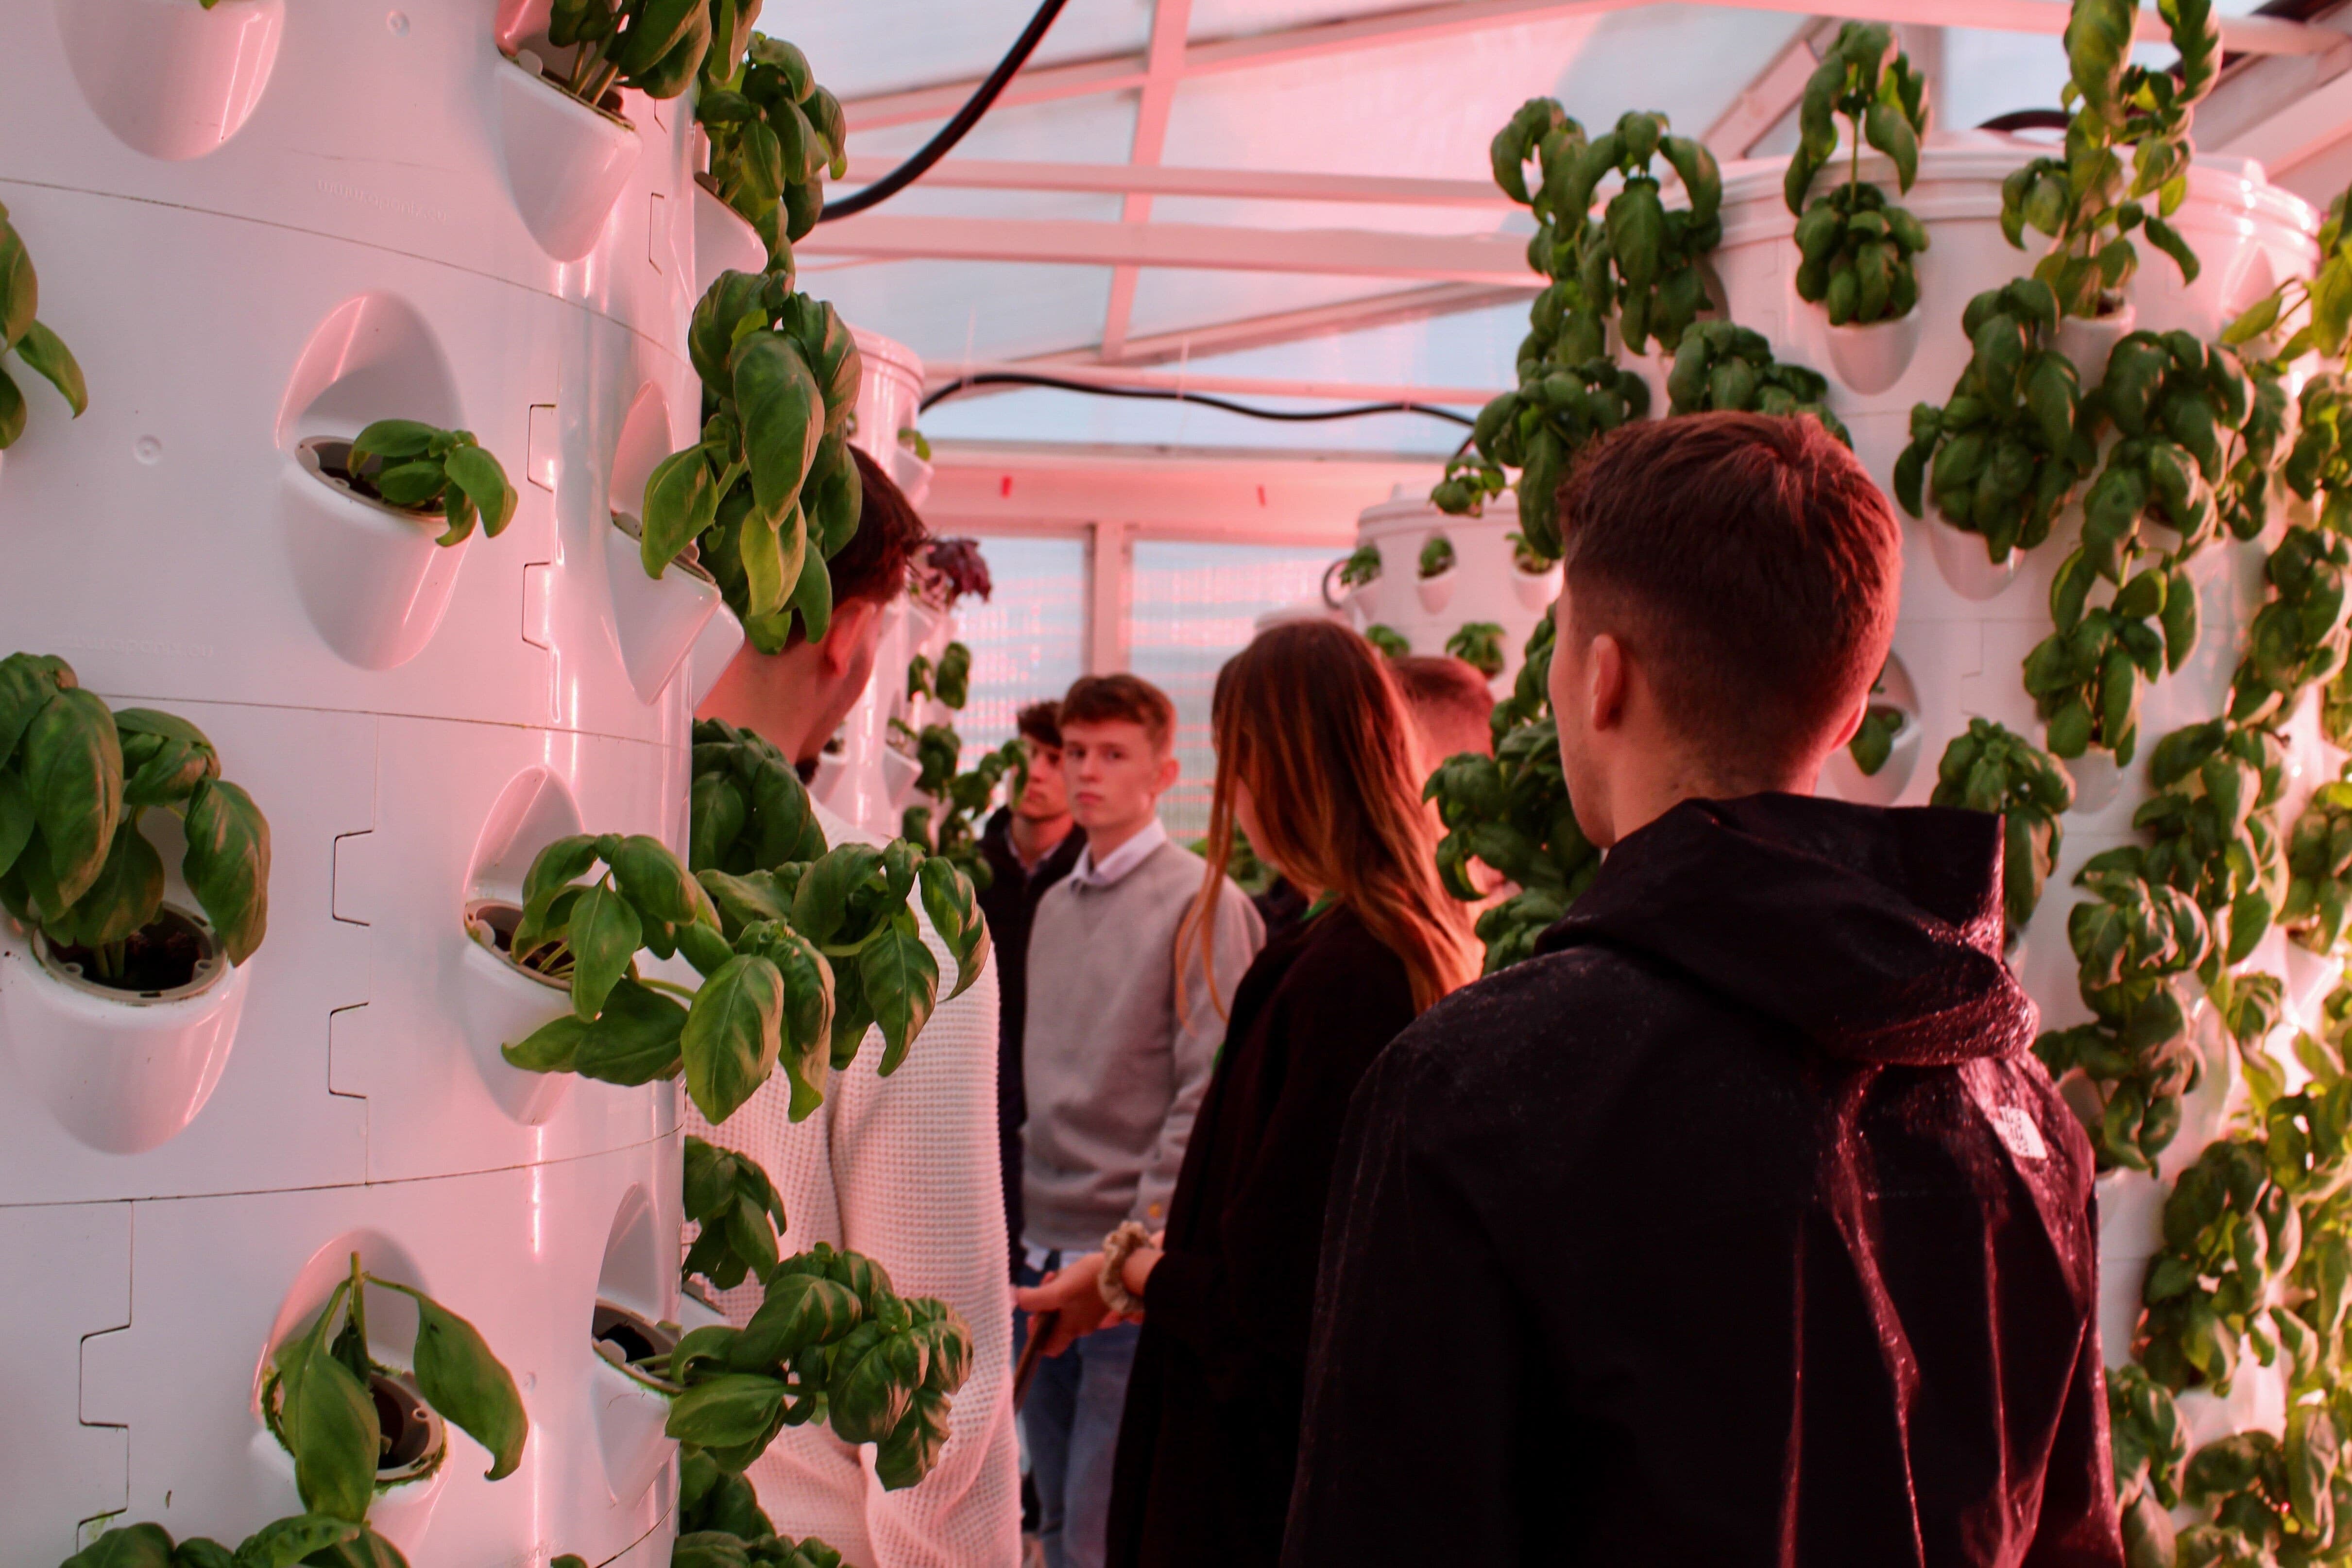 Photo highlighting aspects of vertical farming or greenhouse setups with people